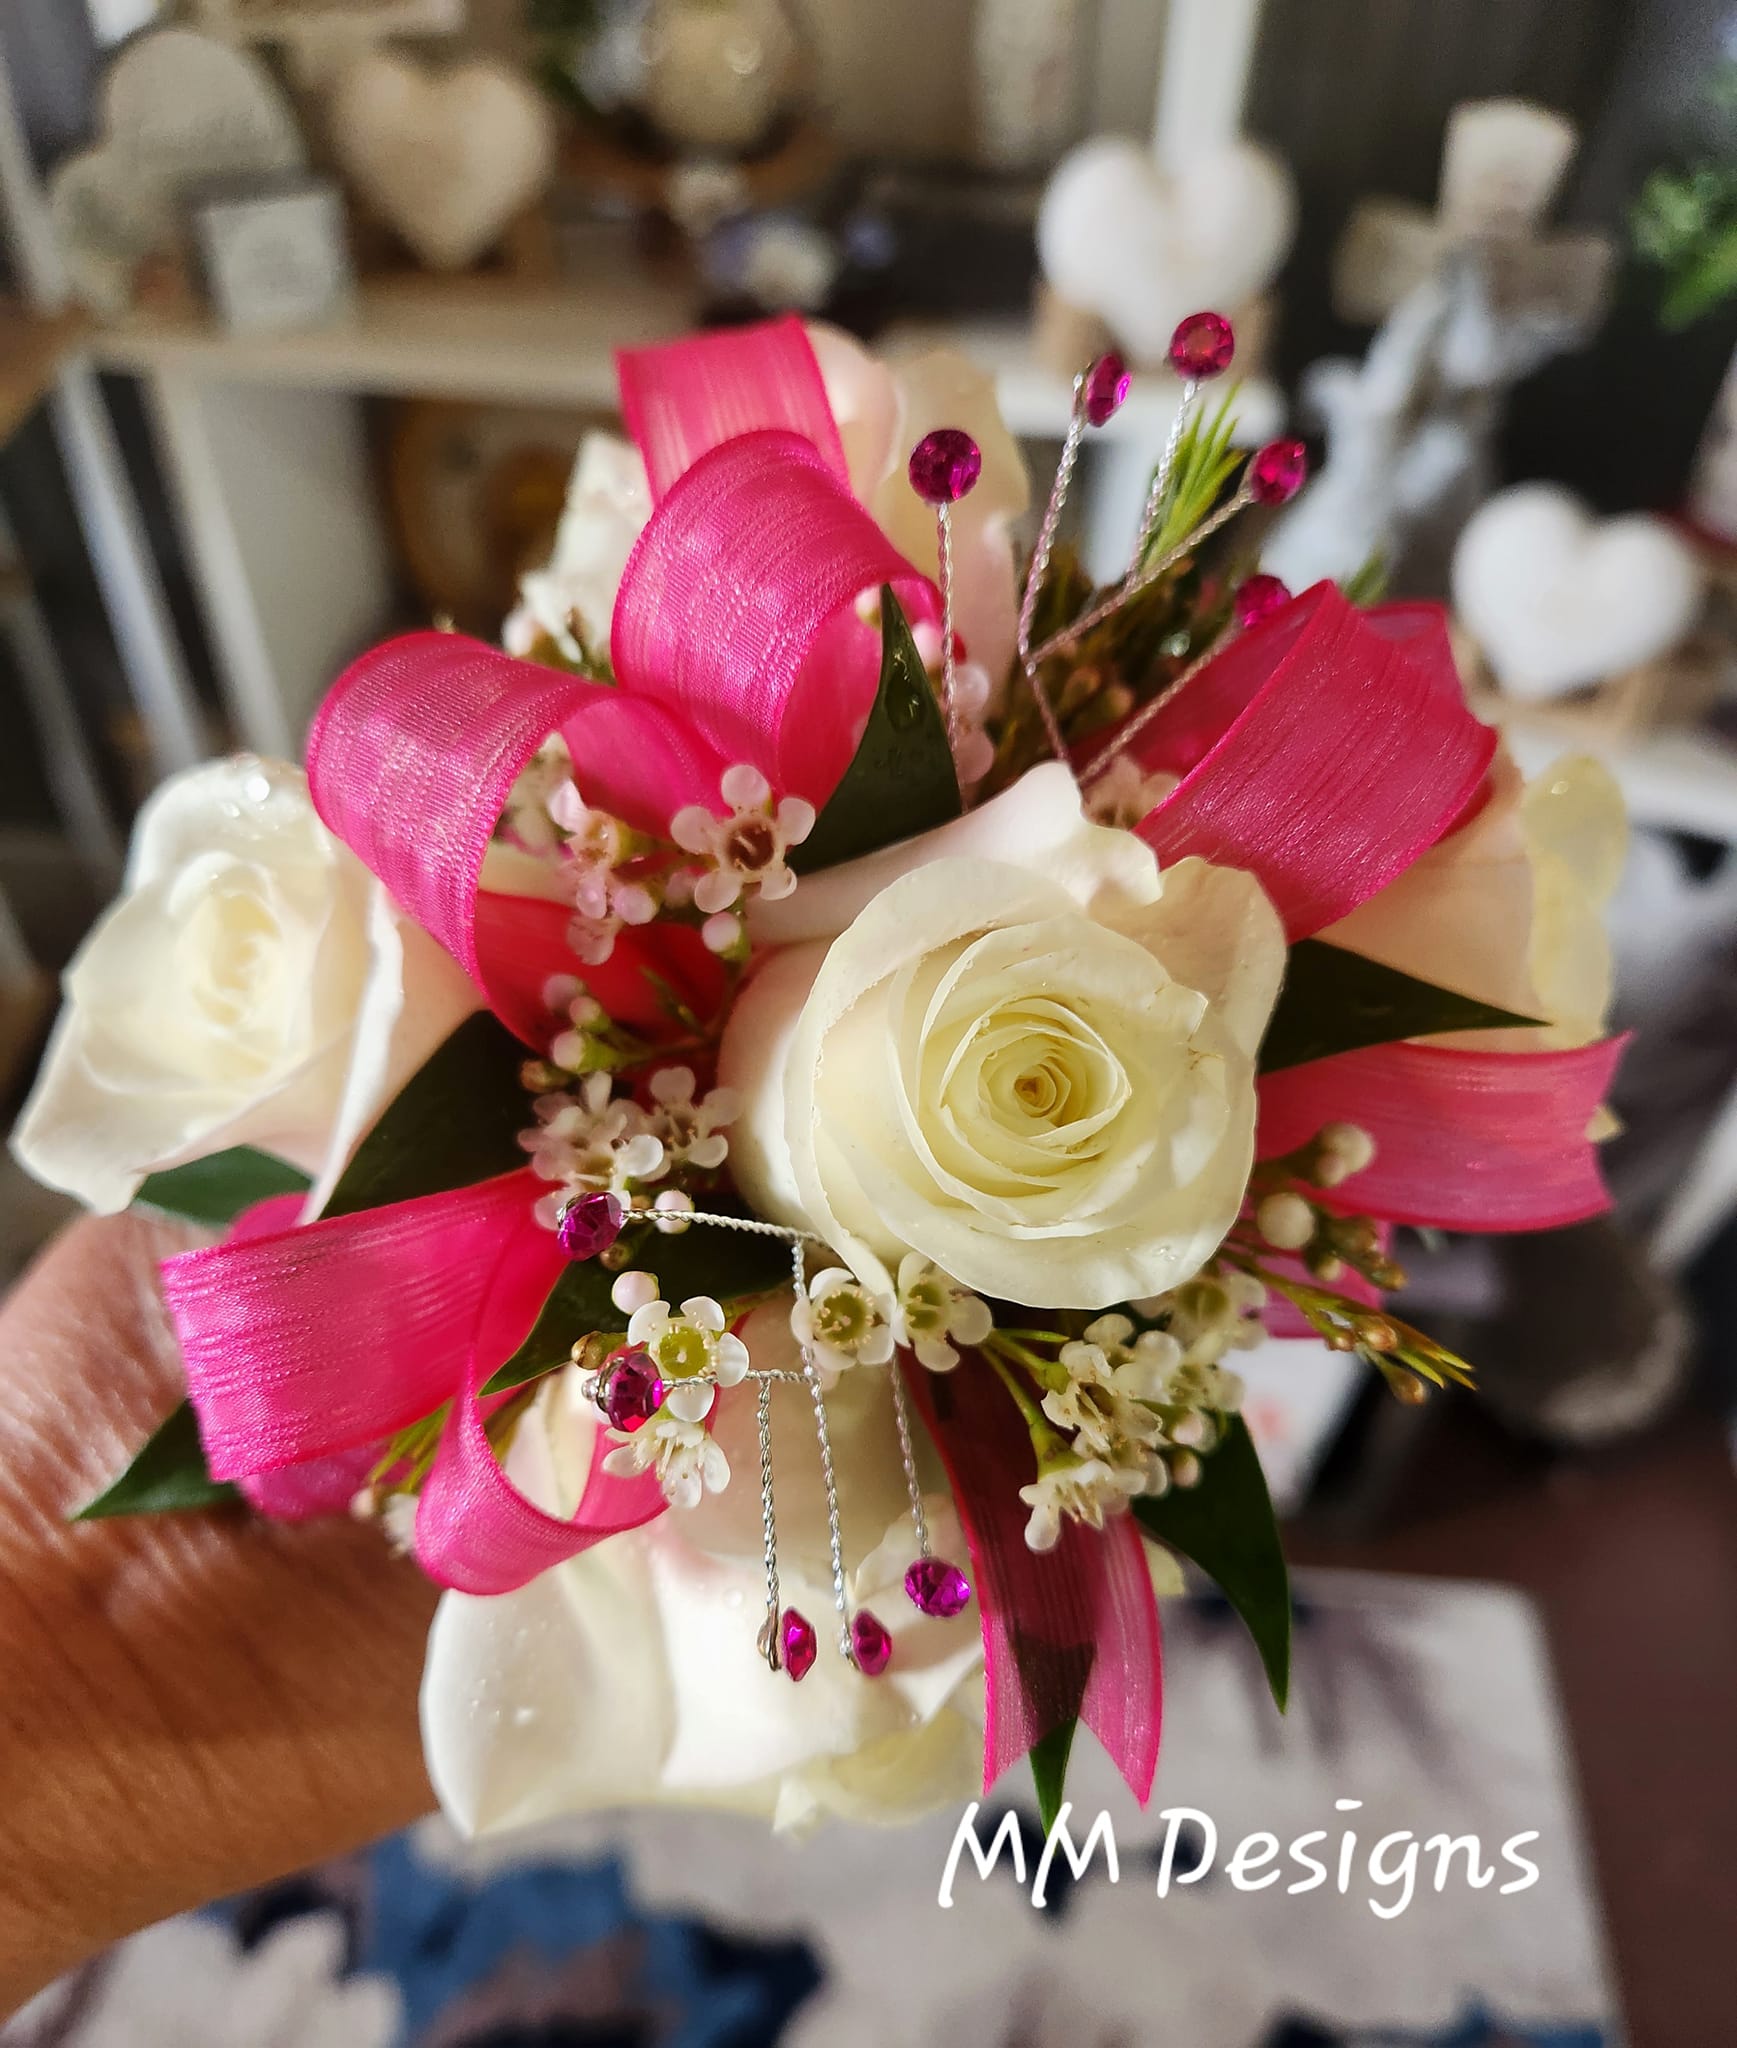 MM Designs Flowers & Gifts Located in Uniontown, 11033 E County Rd 200 S, Crothersville Indiana 47229